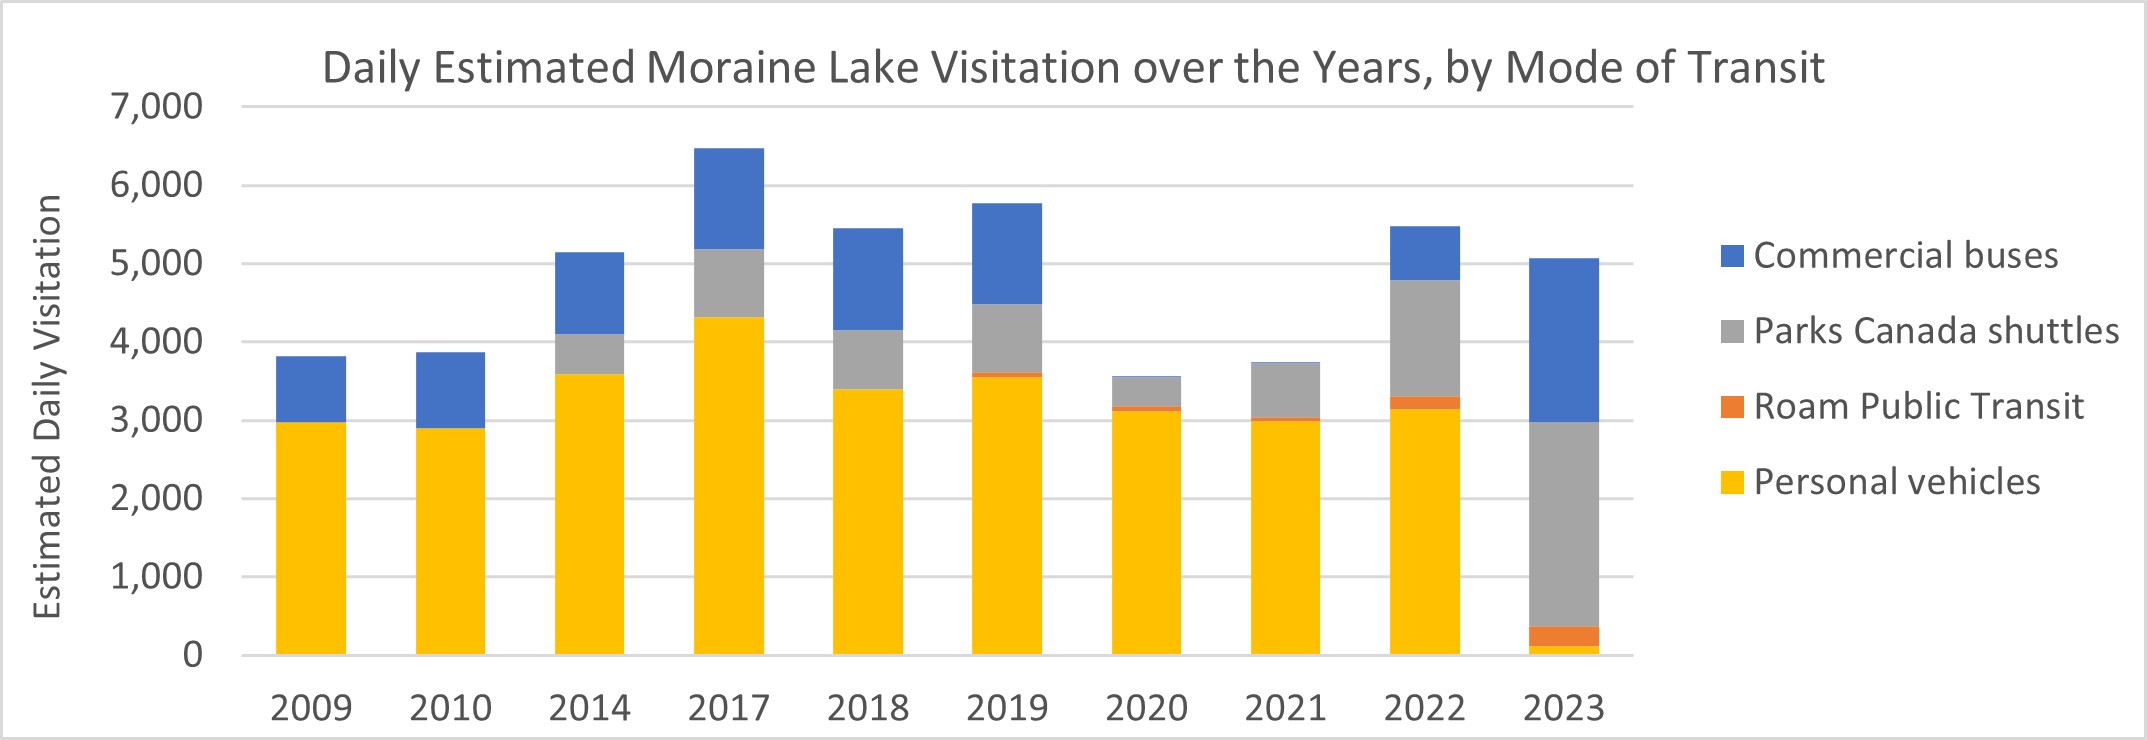 Graphic of Daily Estimated Moraine Lake Visitation over the Years, by Mode of Transit. More details provided in the text version below. 